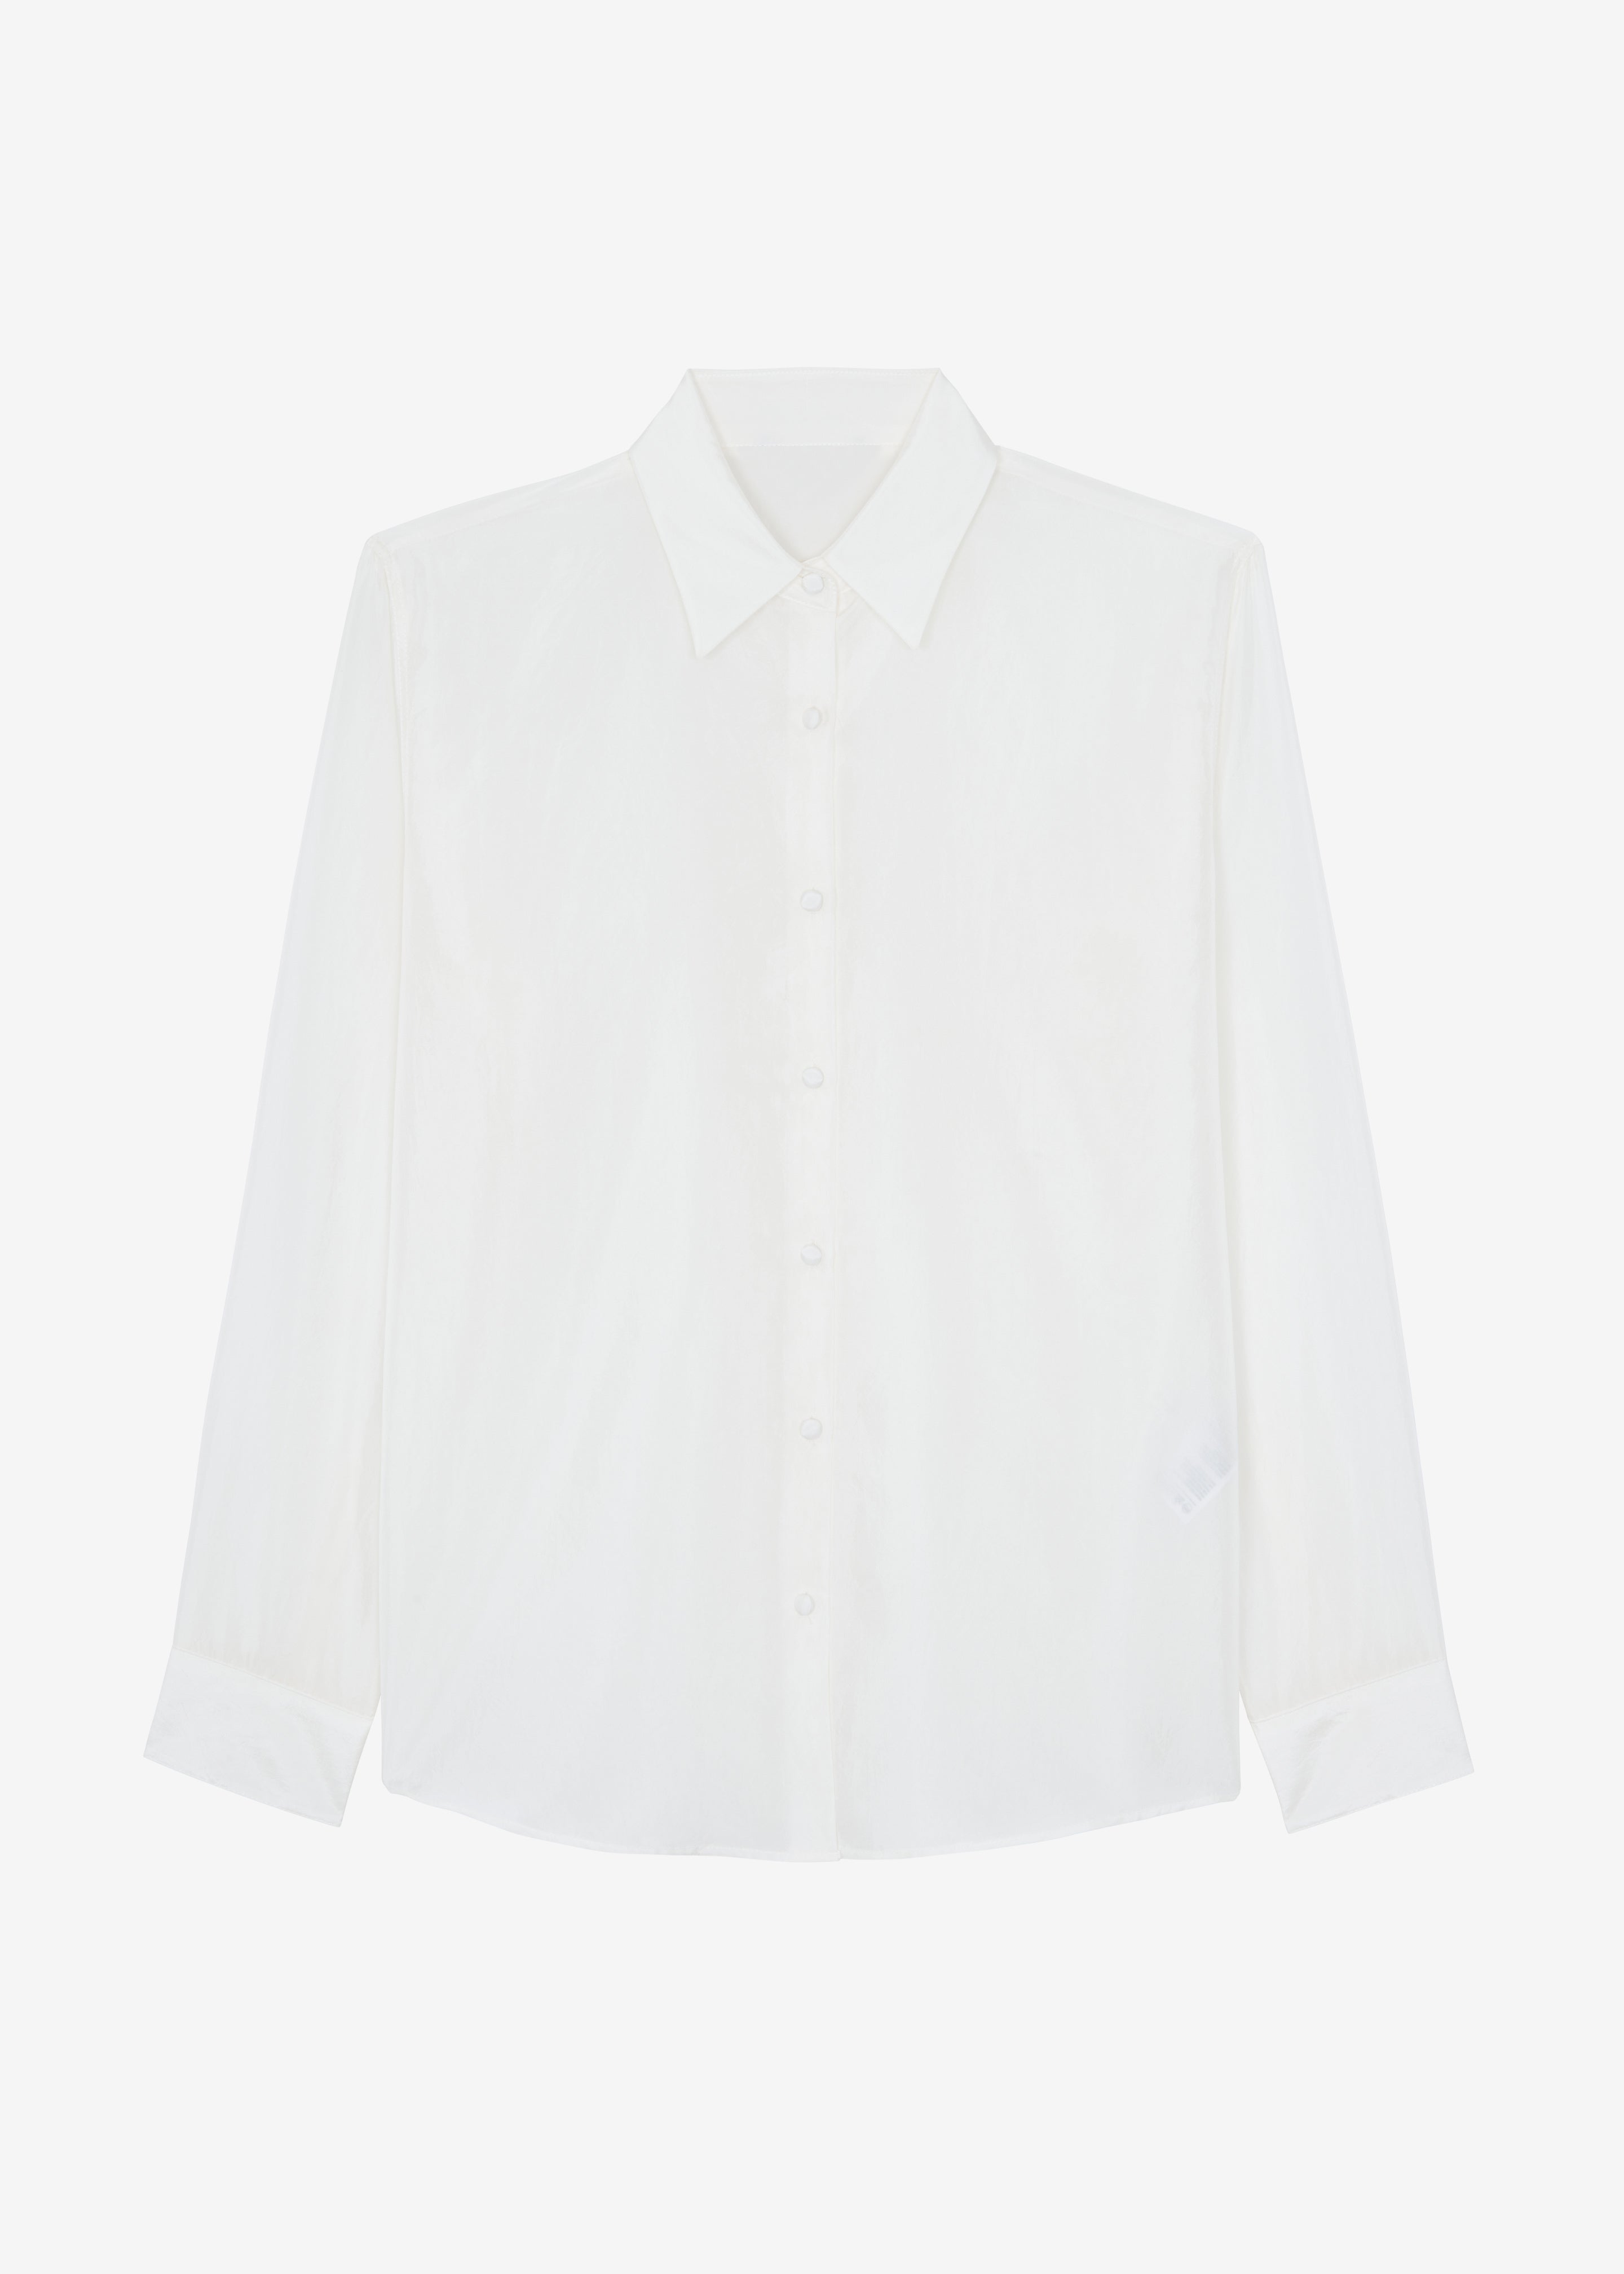 Victoria Silky Blouse - Ivory - 11